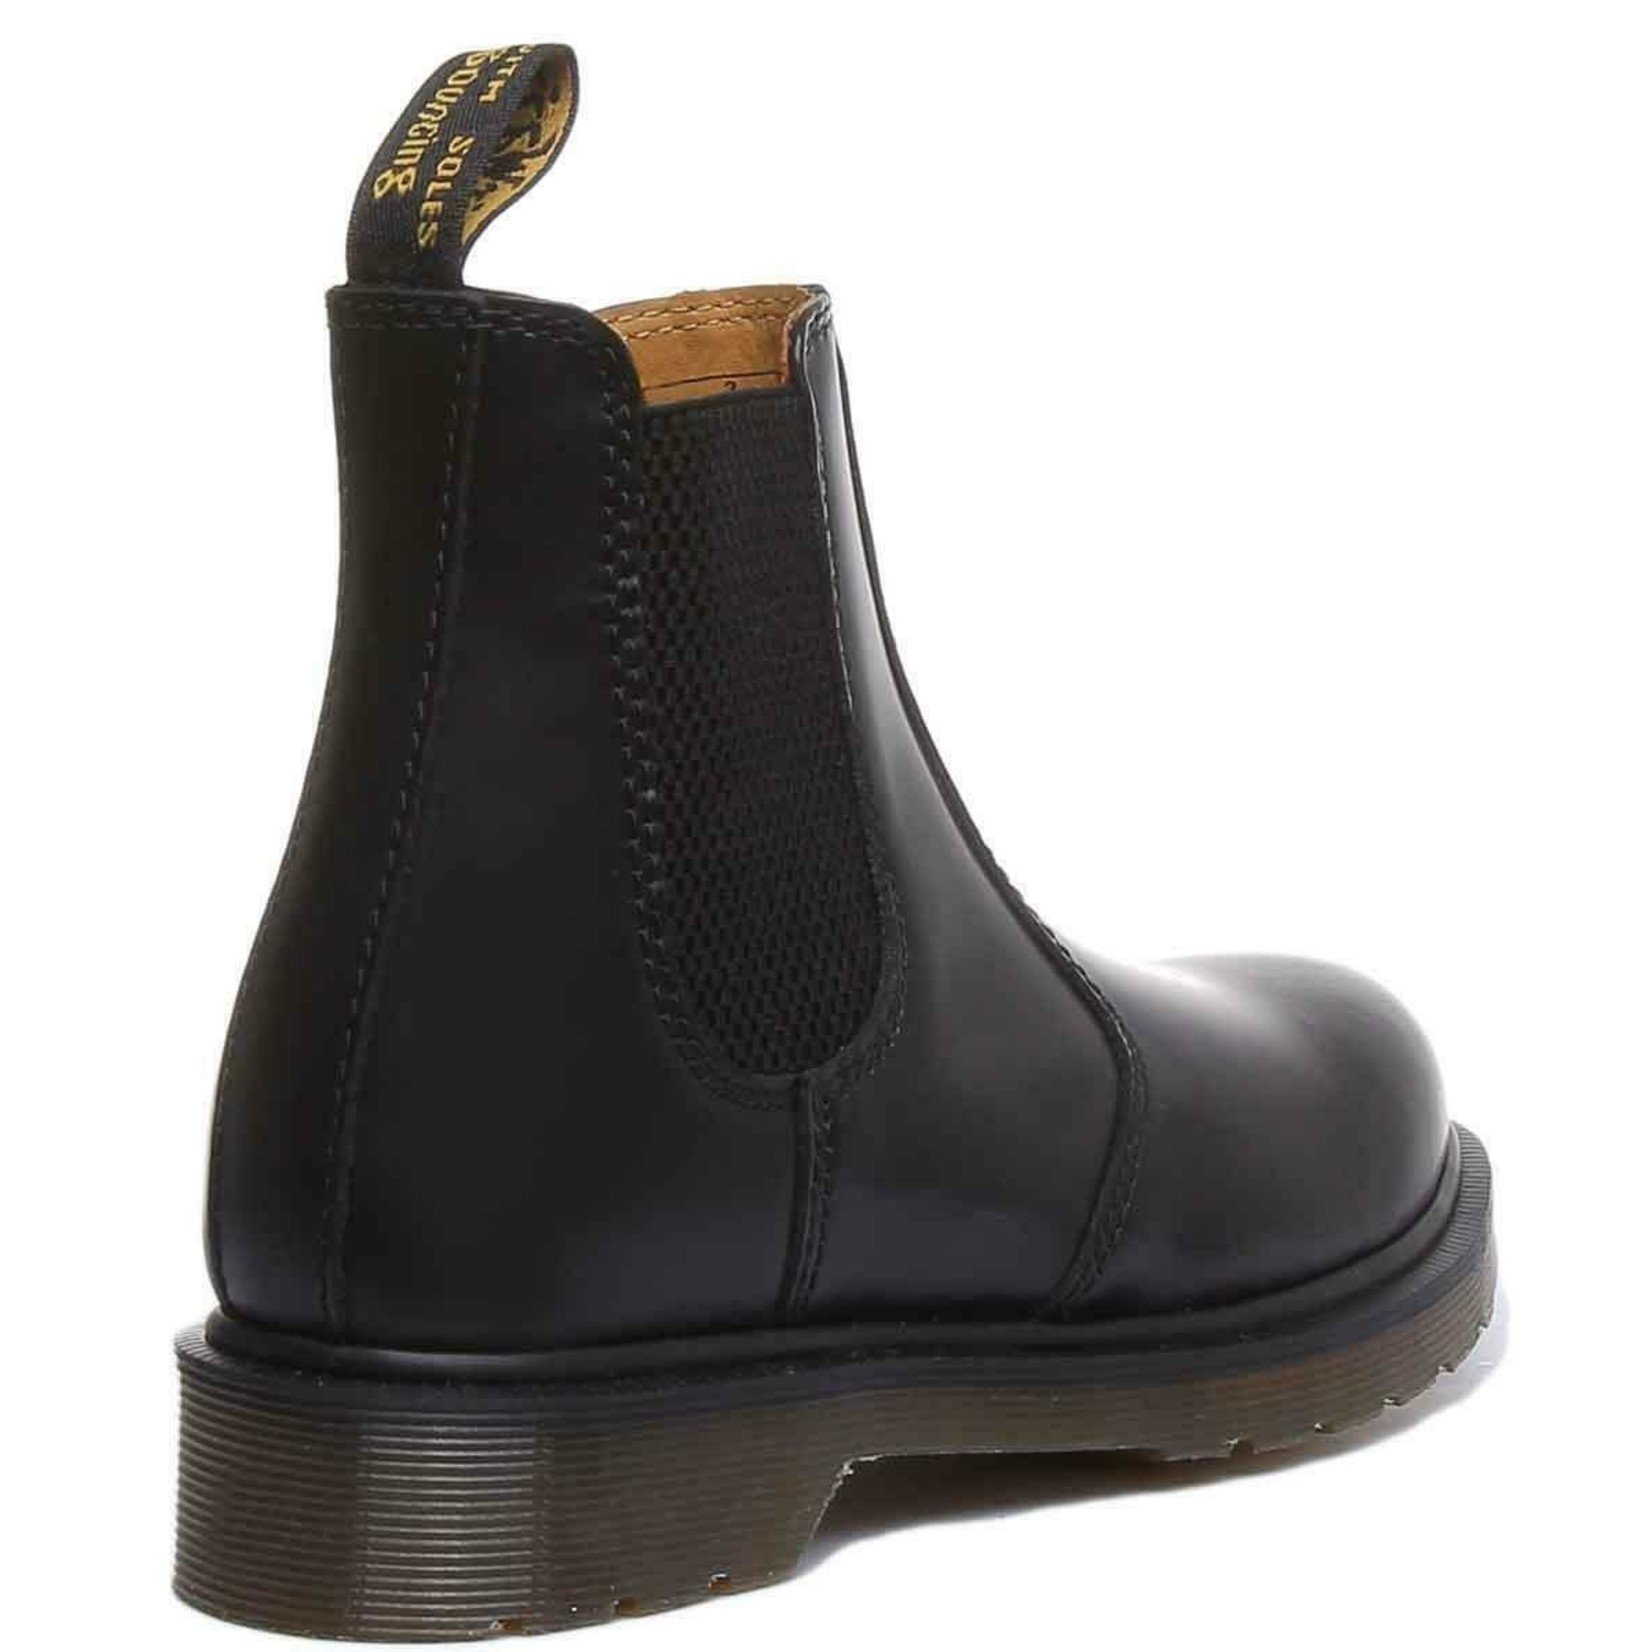 Meyella Fumble excitation Dr. Martens 2976 Smooth Leather Chelsea Boot Black 11853001 - Chester Boot  Shop